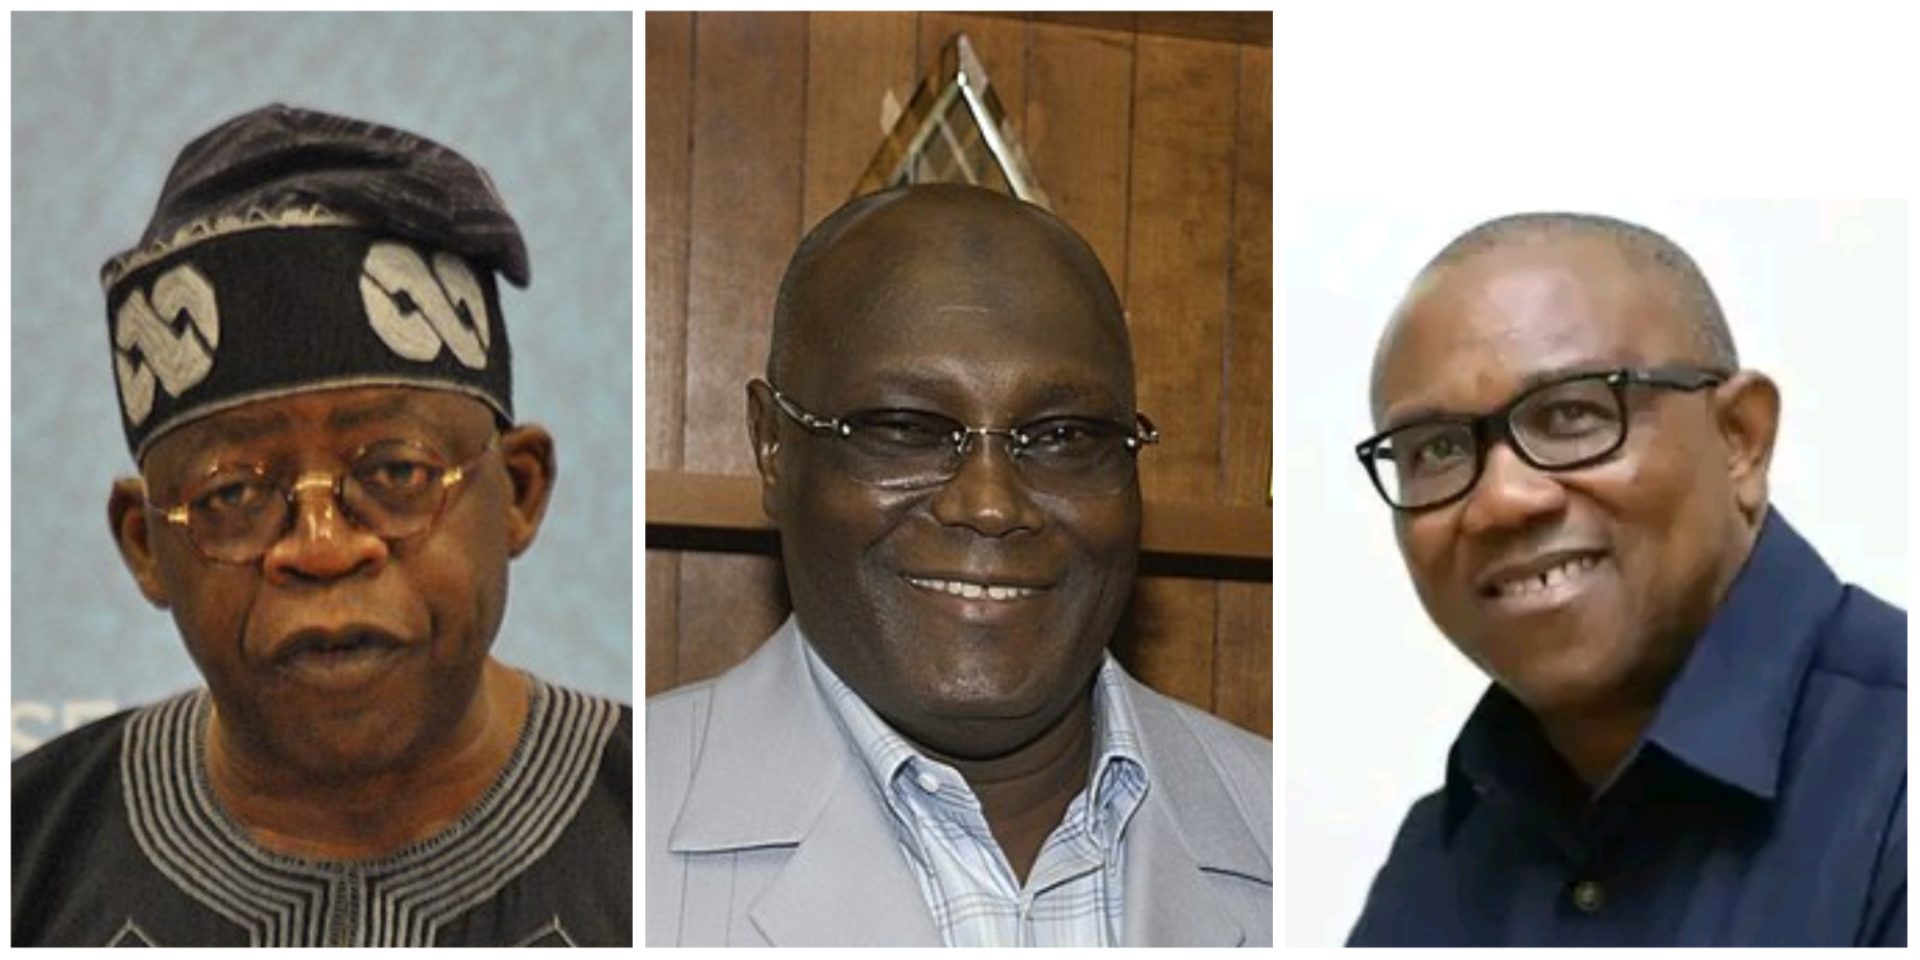 Nigeria is picking between two traditional presidential candidates Bola Ahmed Tinubu and
Atiku Abubakar, while Peter Obi is the dark-horse, writes Gwynne Dyer.
Wikimedia Commons